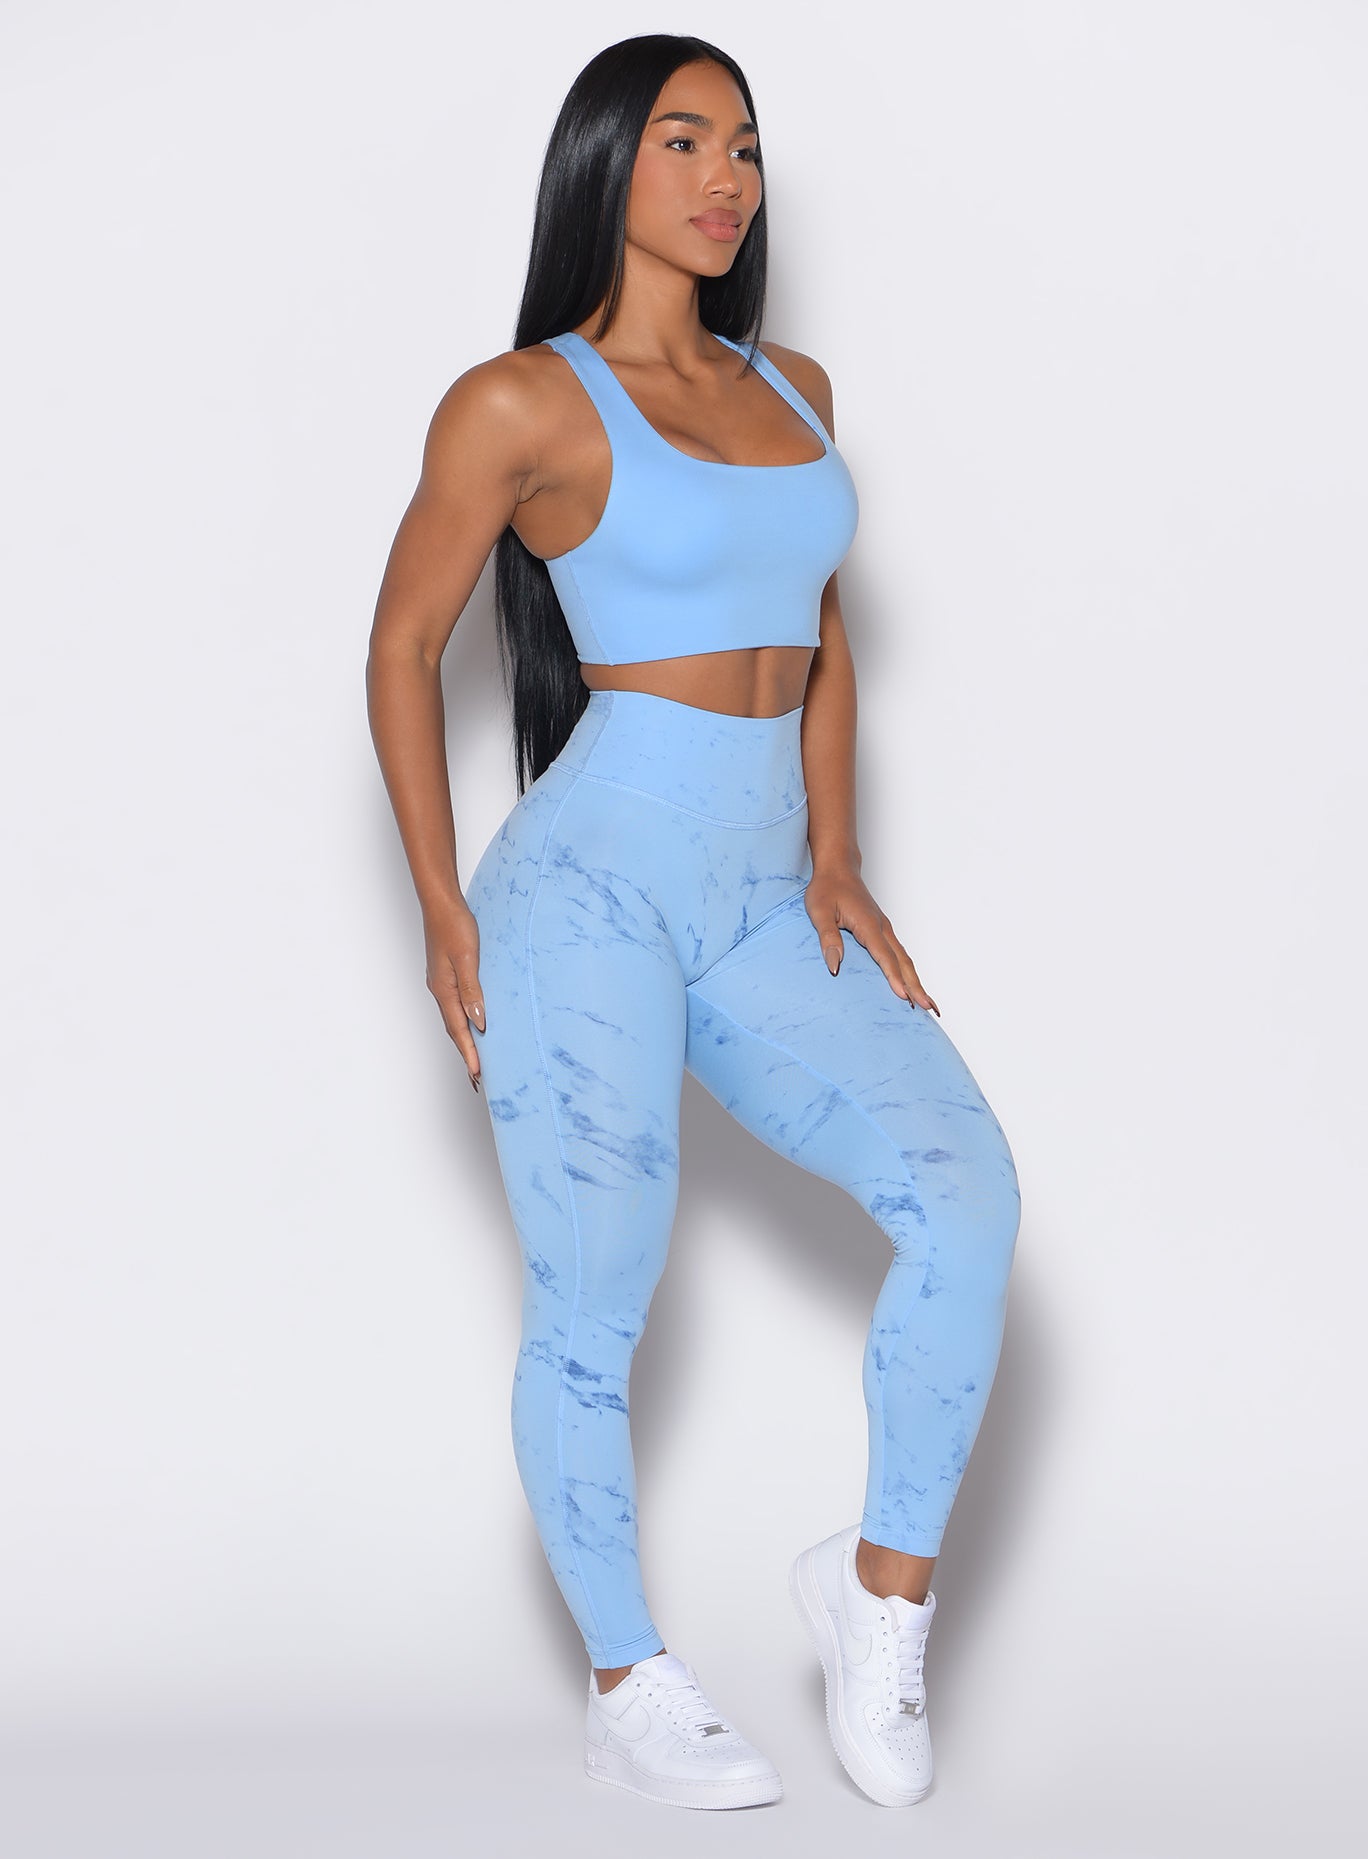 right side  profile view of a model wearing our fit marble leggings in Blue Jay color along with a matching bra